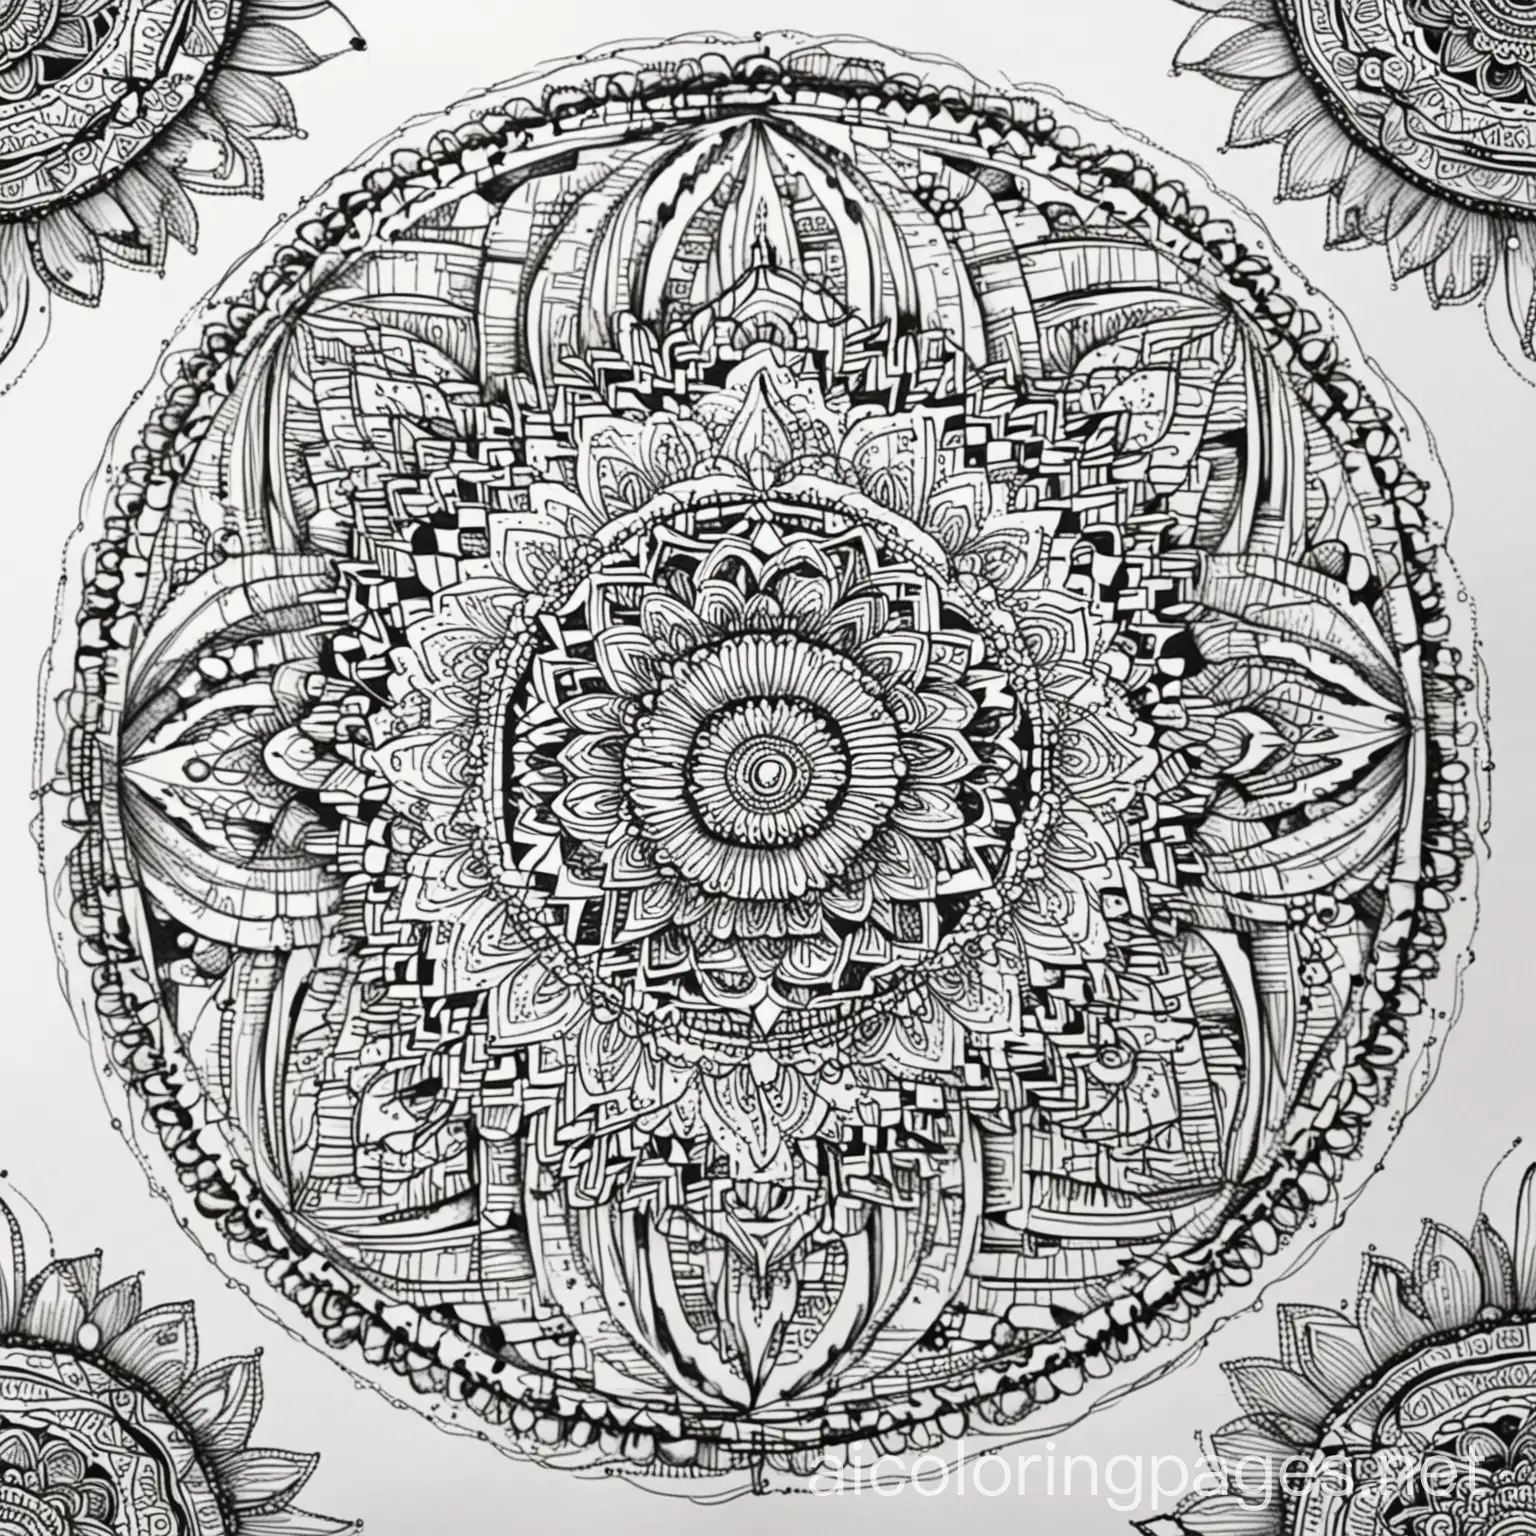 multiple mandalas, Coloring Page, black and white, line art, white background, Simplicity, Ample White Space. The background of the coloring page is plain white to make it easy for young children to color within the lines. The outlines of all the subjects are easy to distinguish, making it simple for kids to color without too much difficulty